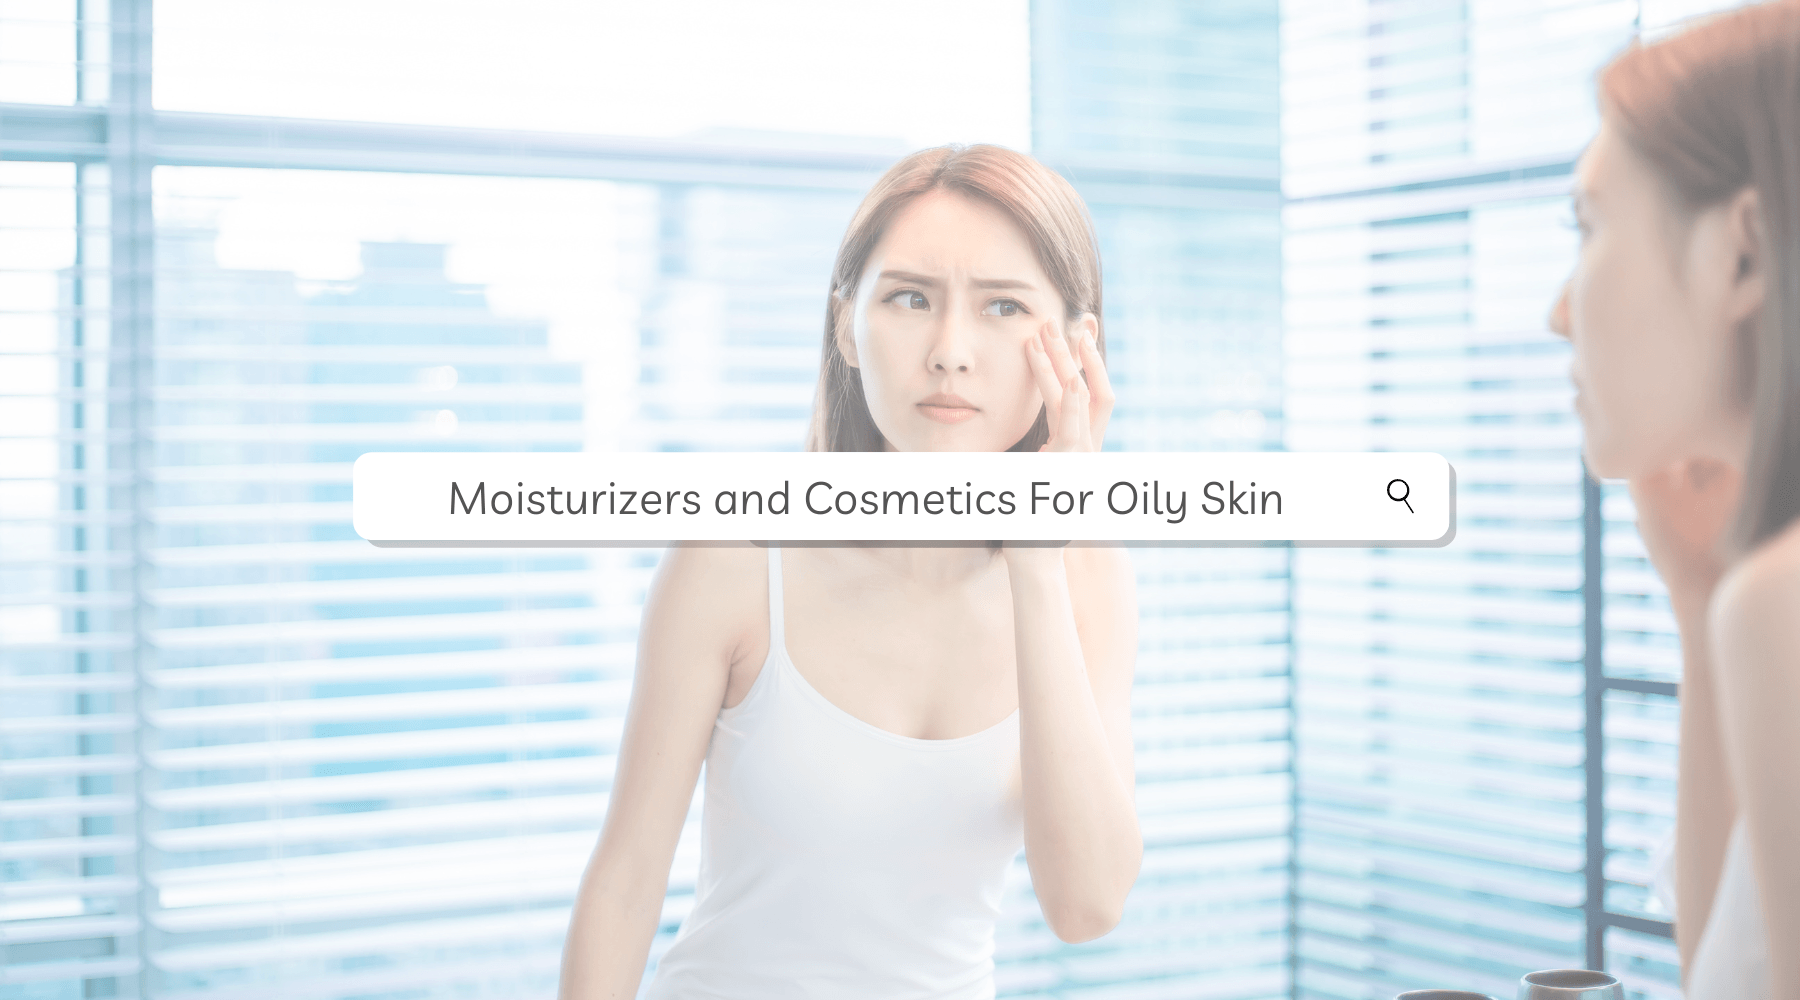 Best Korean Moisturizers and Cosmetics For Oily Skin 2022 - UShops